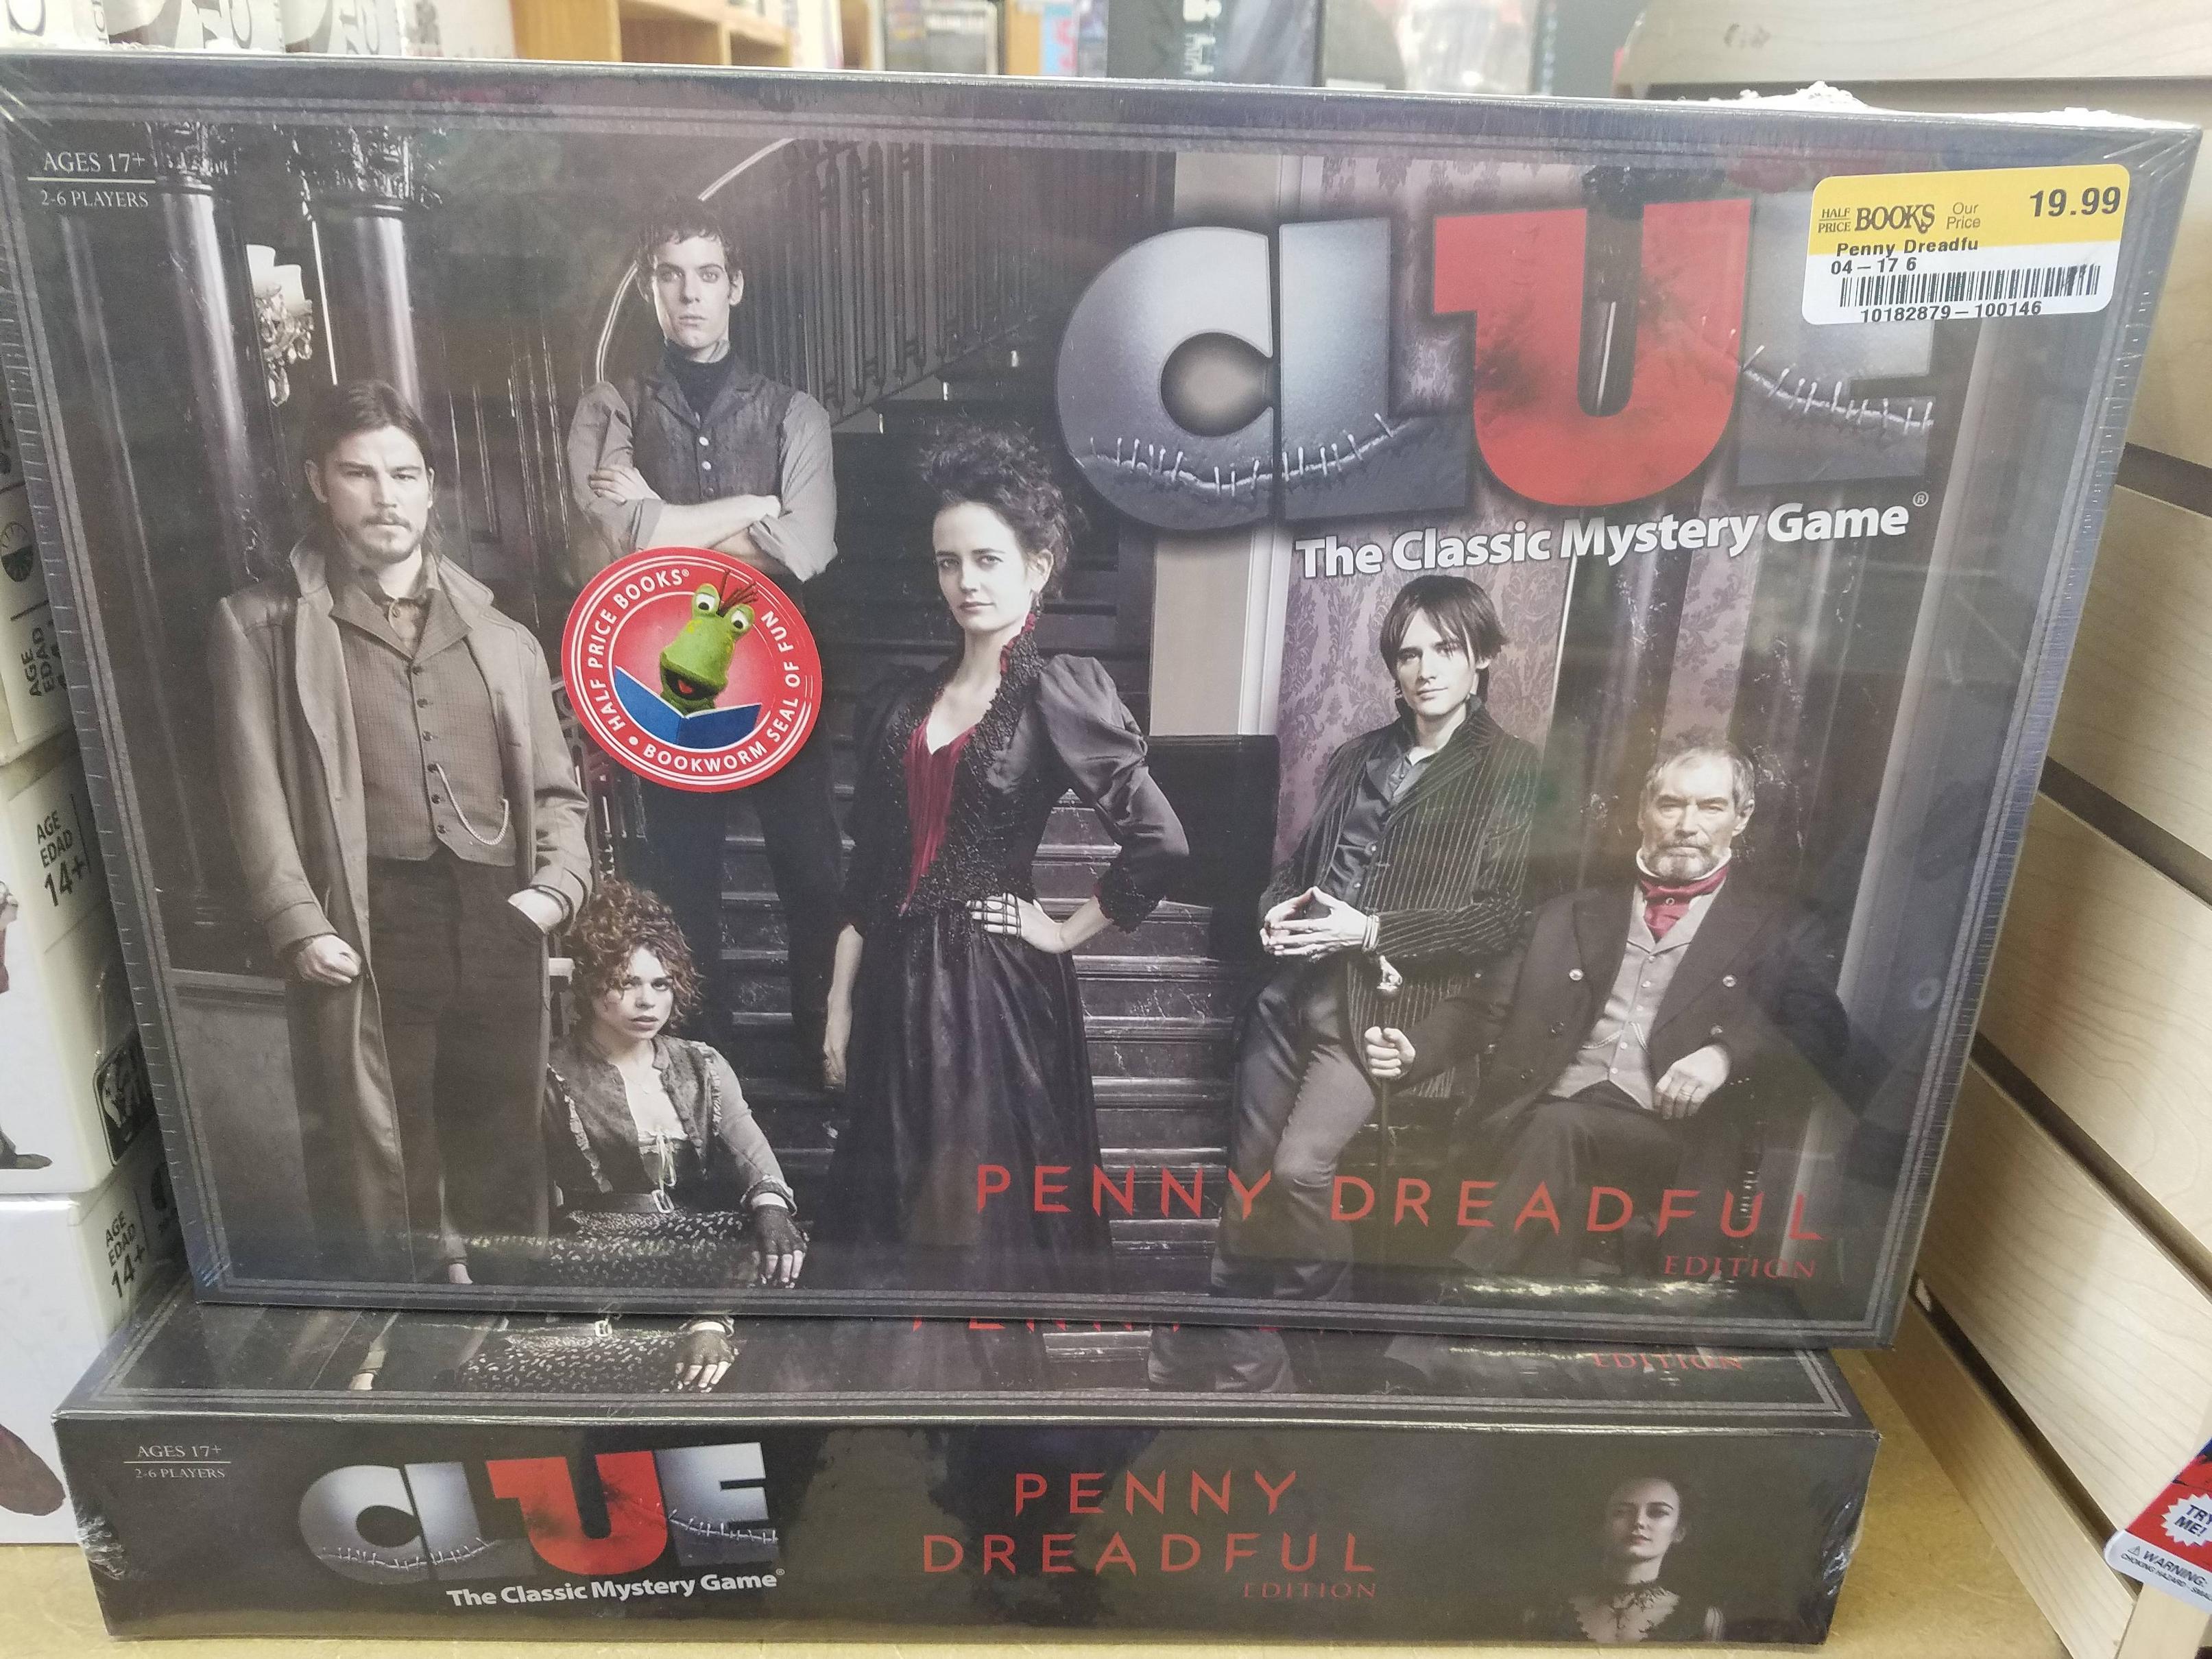 The game Clue has a Penny Dreadful edition Scrolller